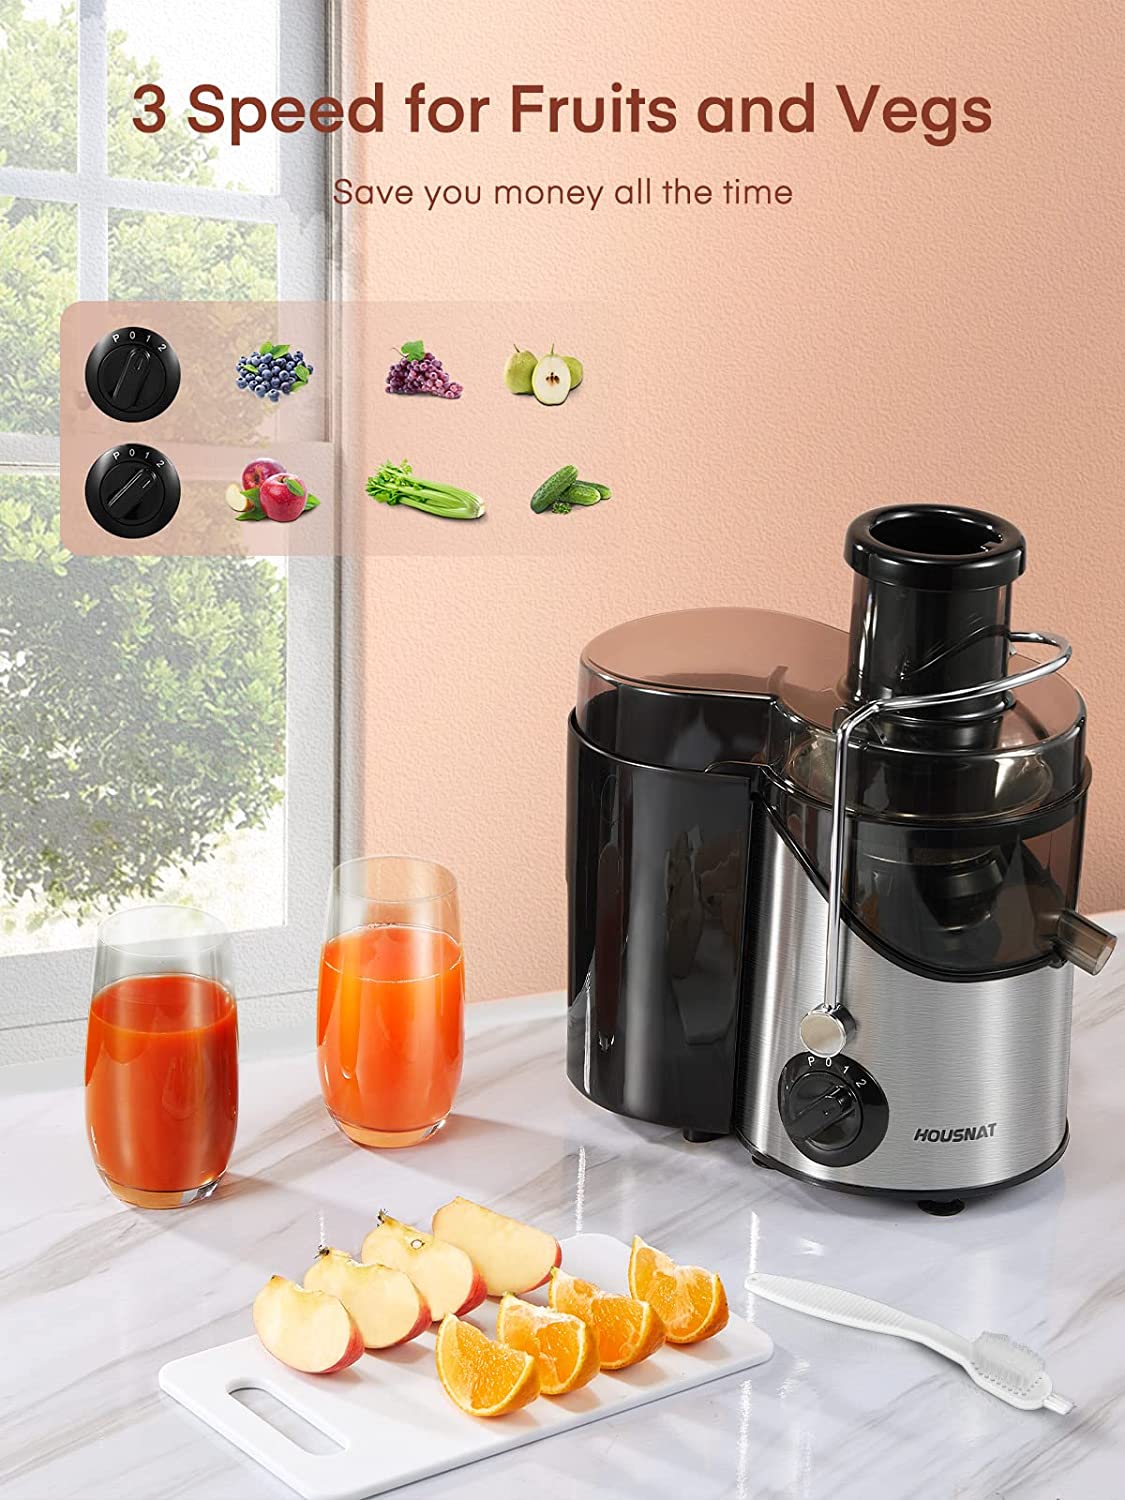 3 speed for fruits and vegs, Juicer Machine, Juicers Easy to Clean, HOUSNAT Centrifugal Extractor Juicer 3 Speeds with Big Mouth 3" Feed Chute, Juicer Extractor for Fruits & Vegs, Electric Juicer with Anti-Slip, BPA-Free